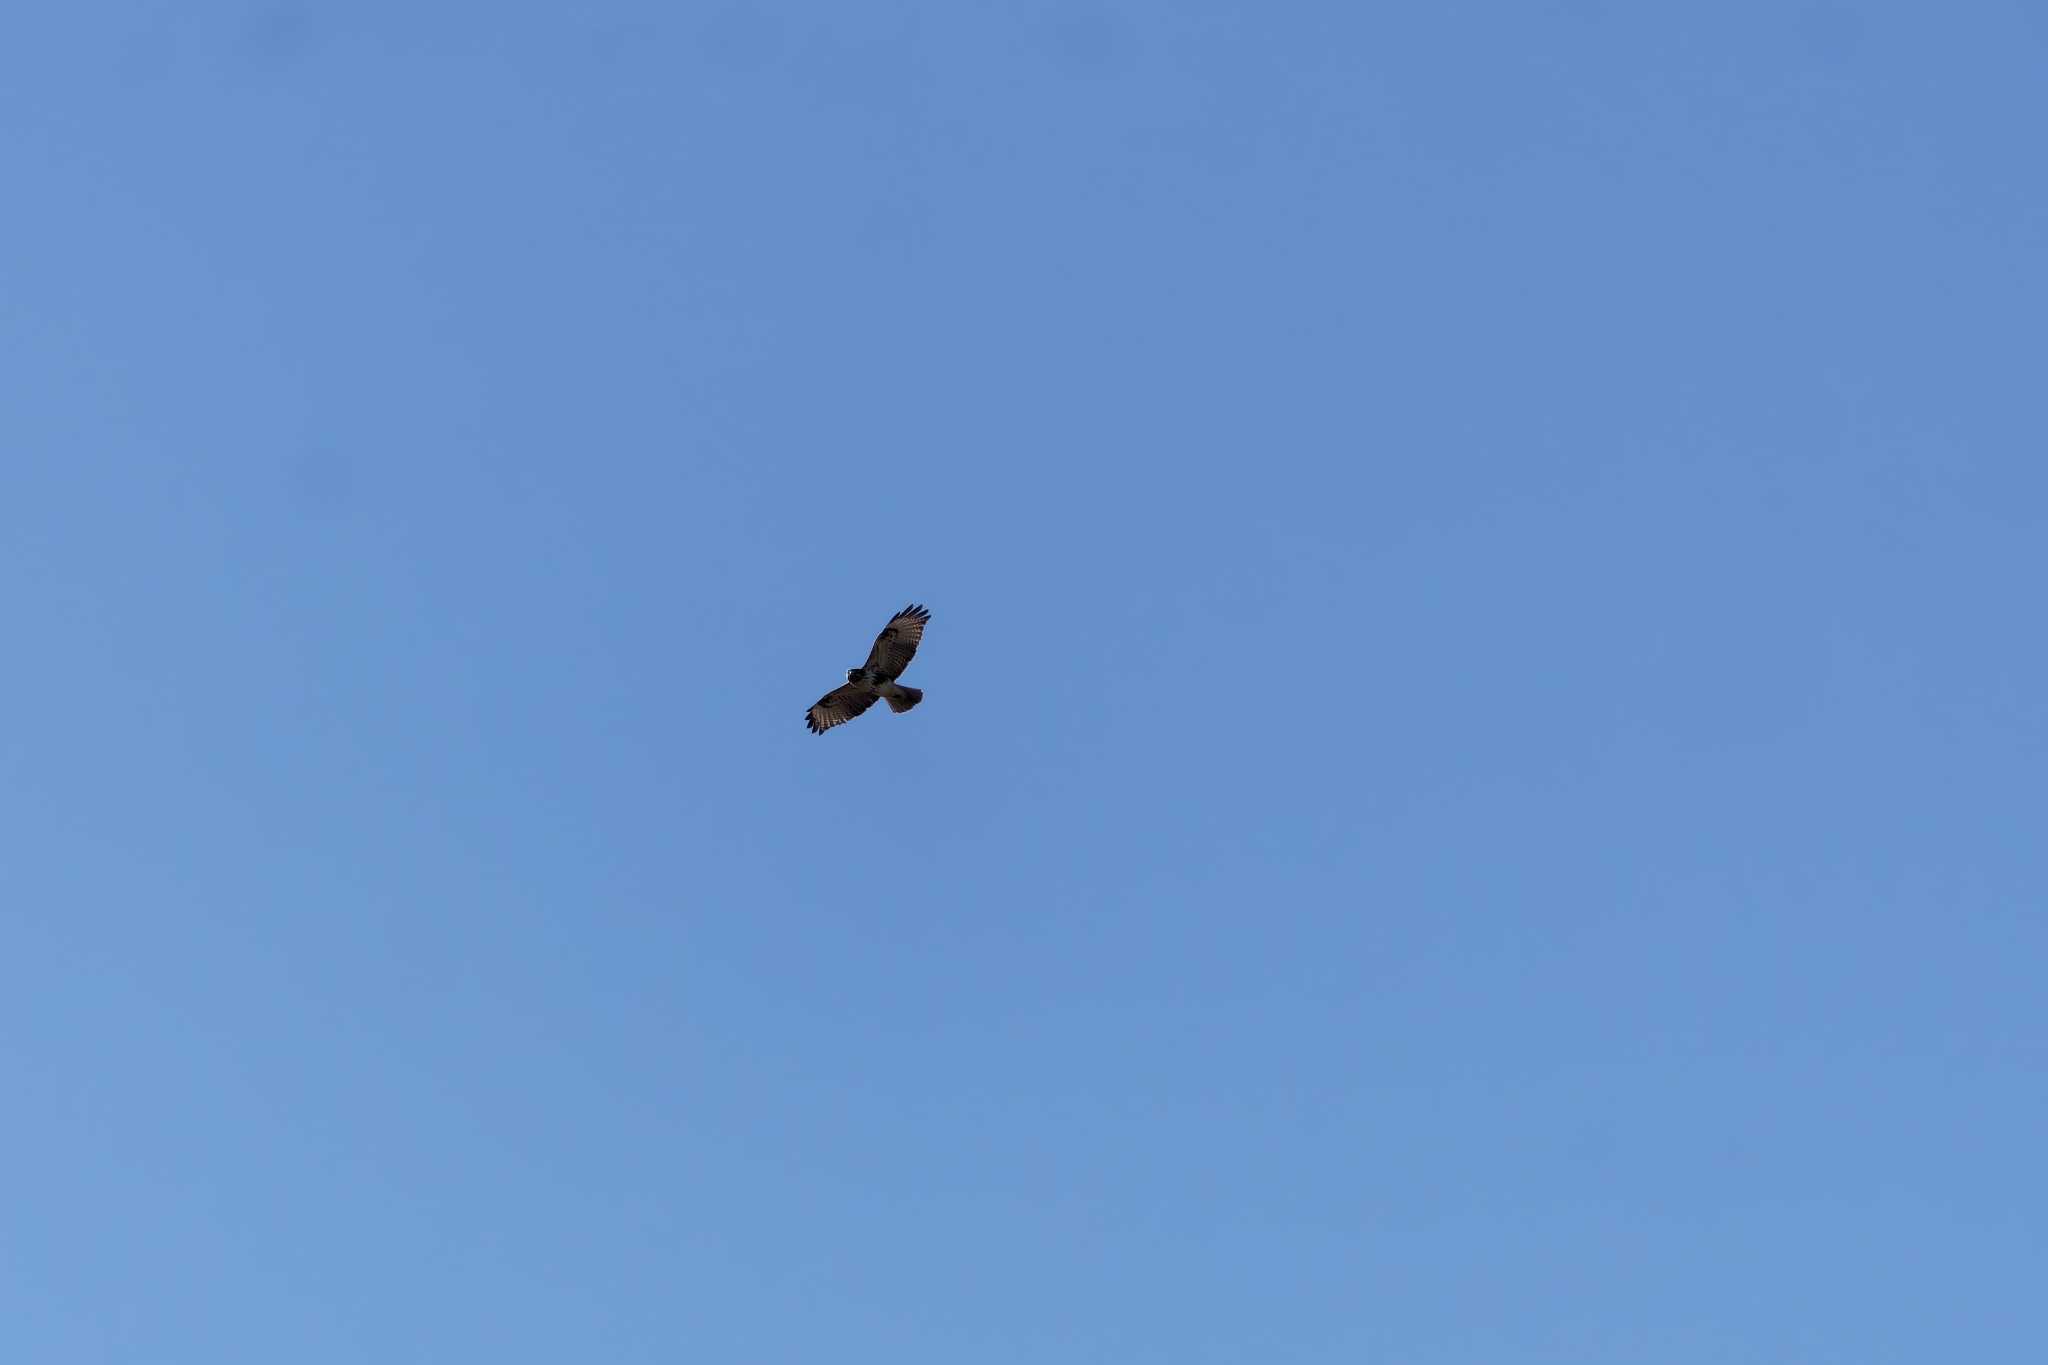 Photo of Eastern Buzzard at Showa Kinen Park by たねもみちゃん